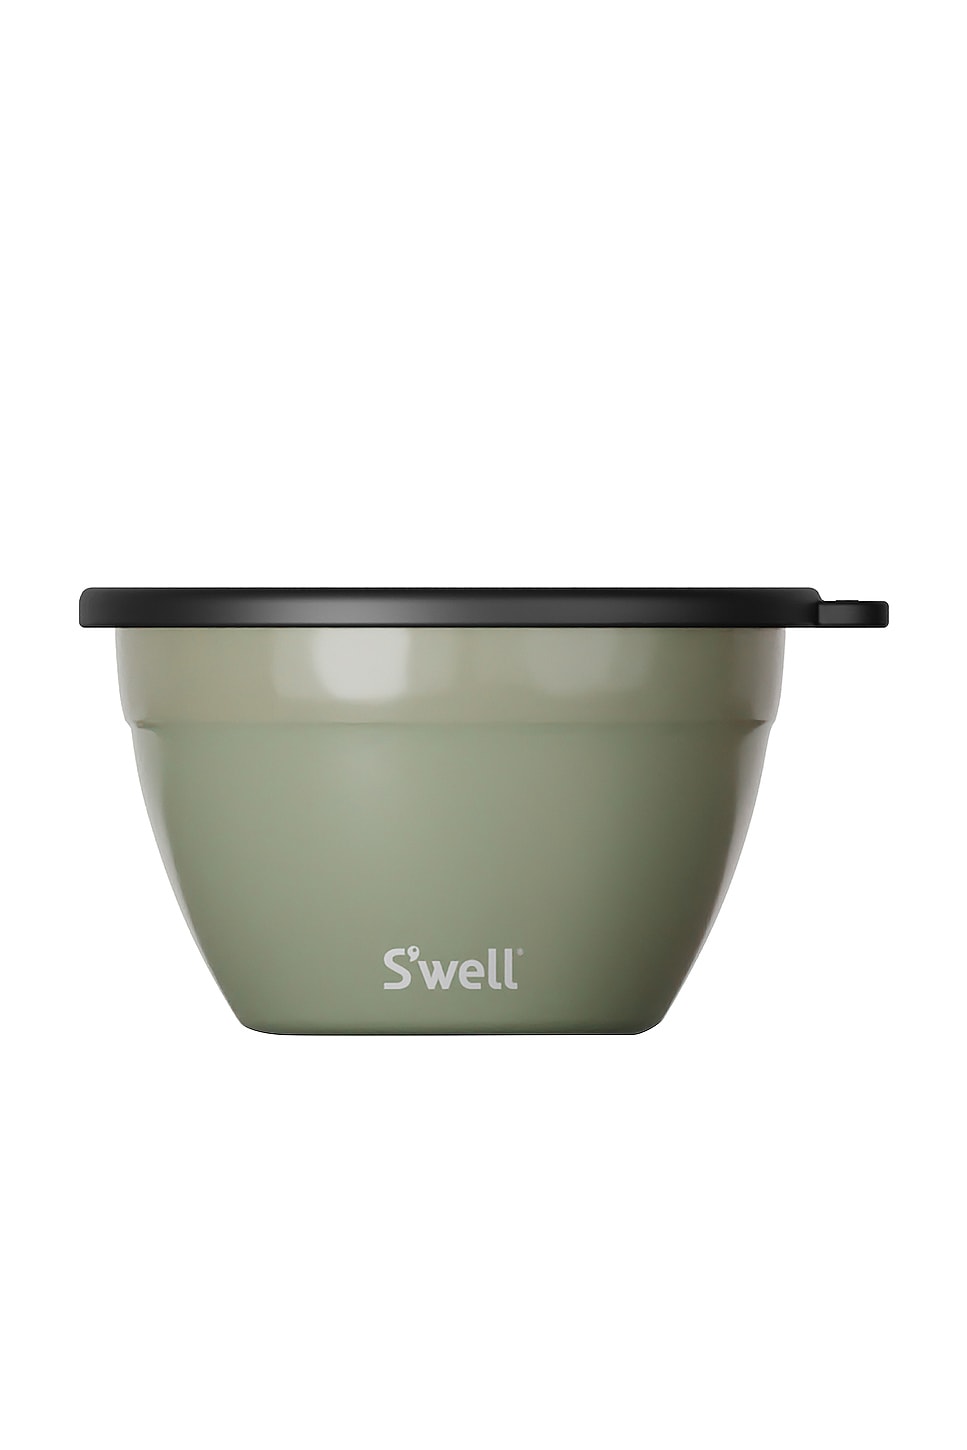  Swell Stainless Steel Salad Bowl Kit 64 Ounces Mountain Sage  Comes